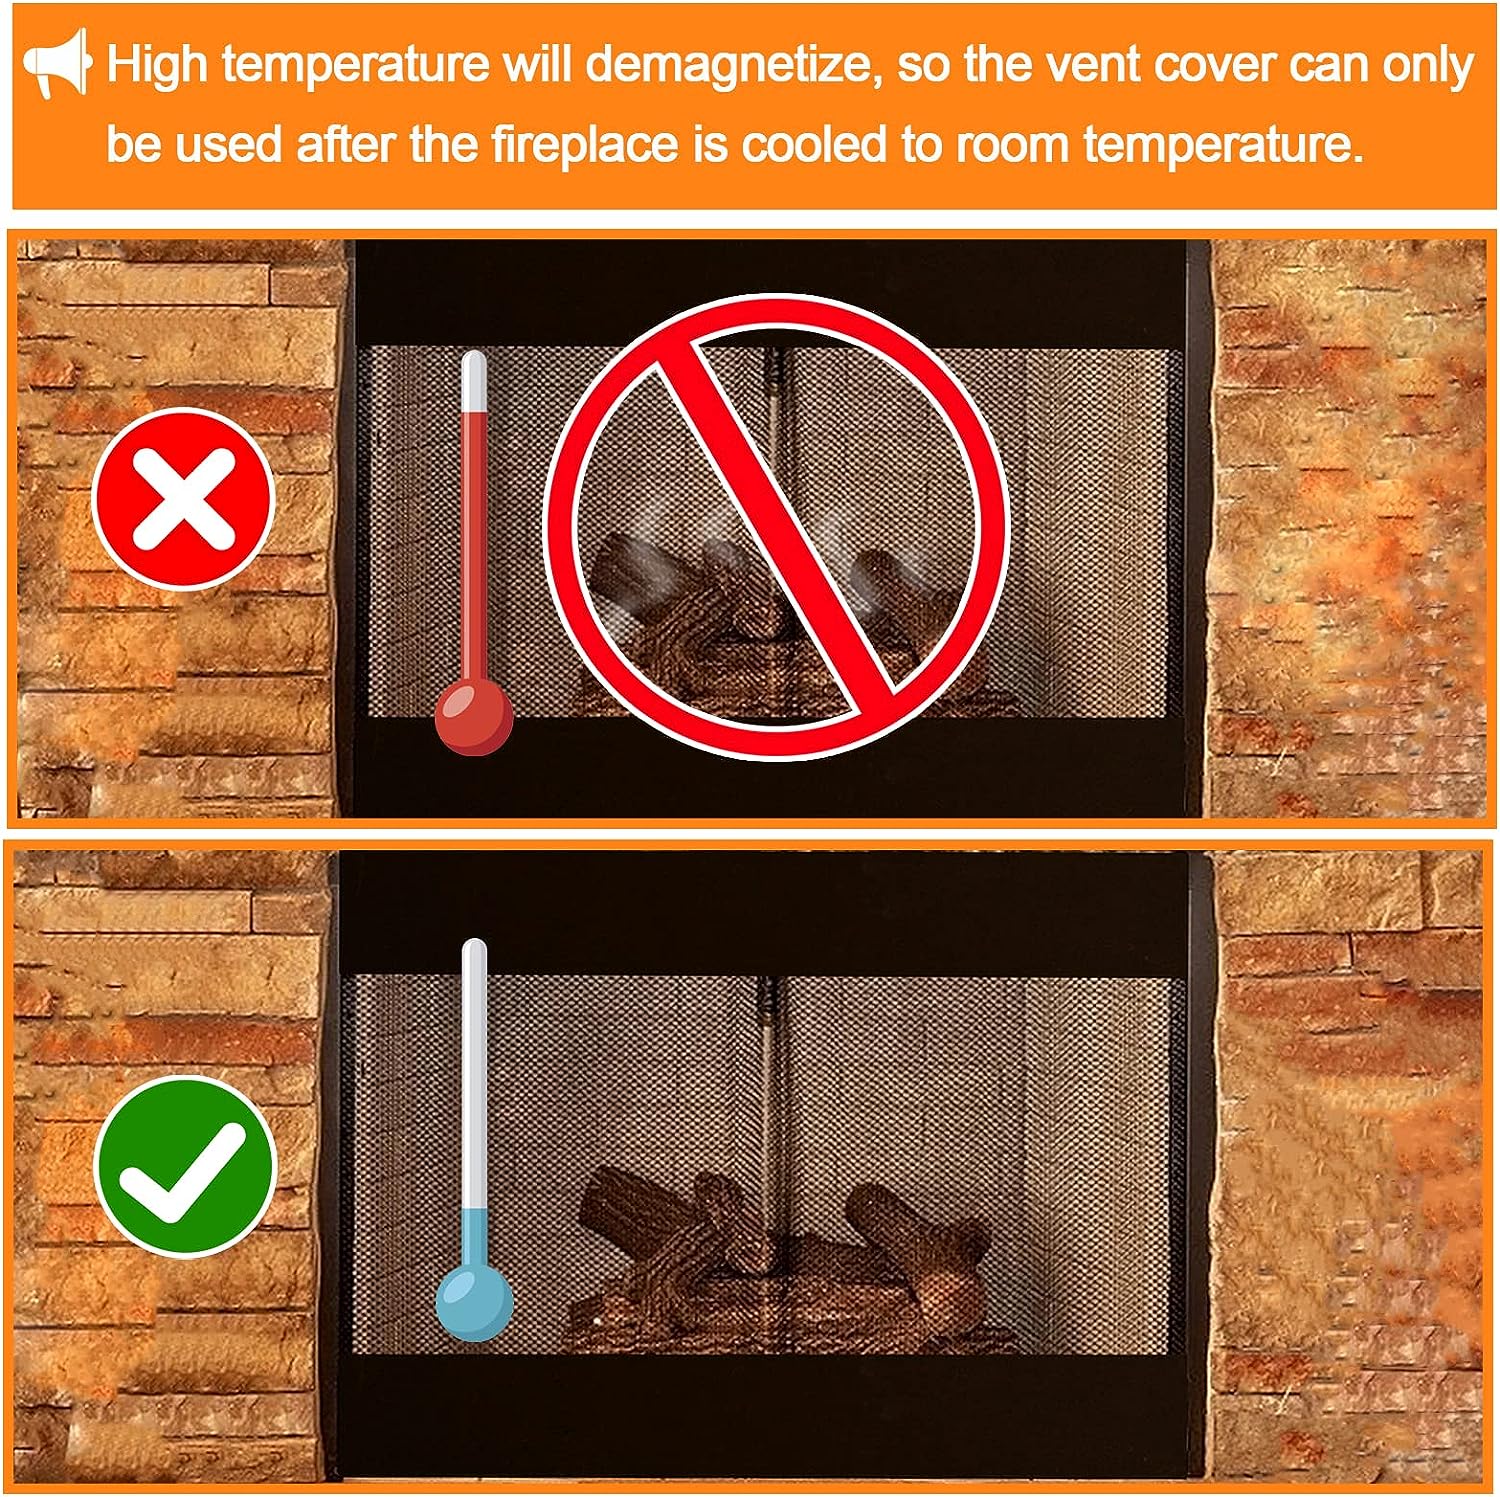  Magnetic Fireplace Draft Stopper - Fireplace Cover to Block  Cold Air from Vent to Prevent Heat Loss Magnet Fireplace Screen, Indoor Chimney  Draft Blocker Vent Covers : Home & Kitchen